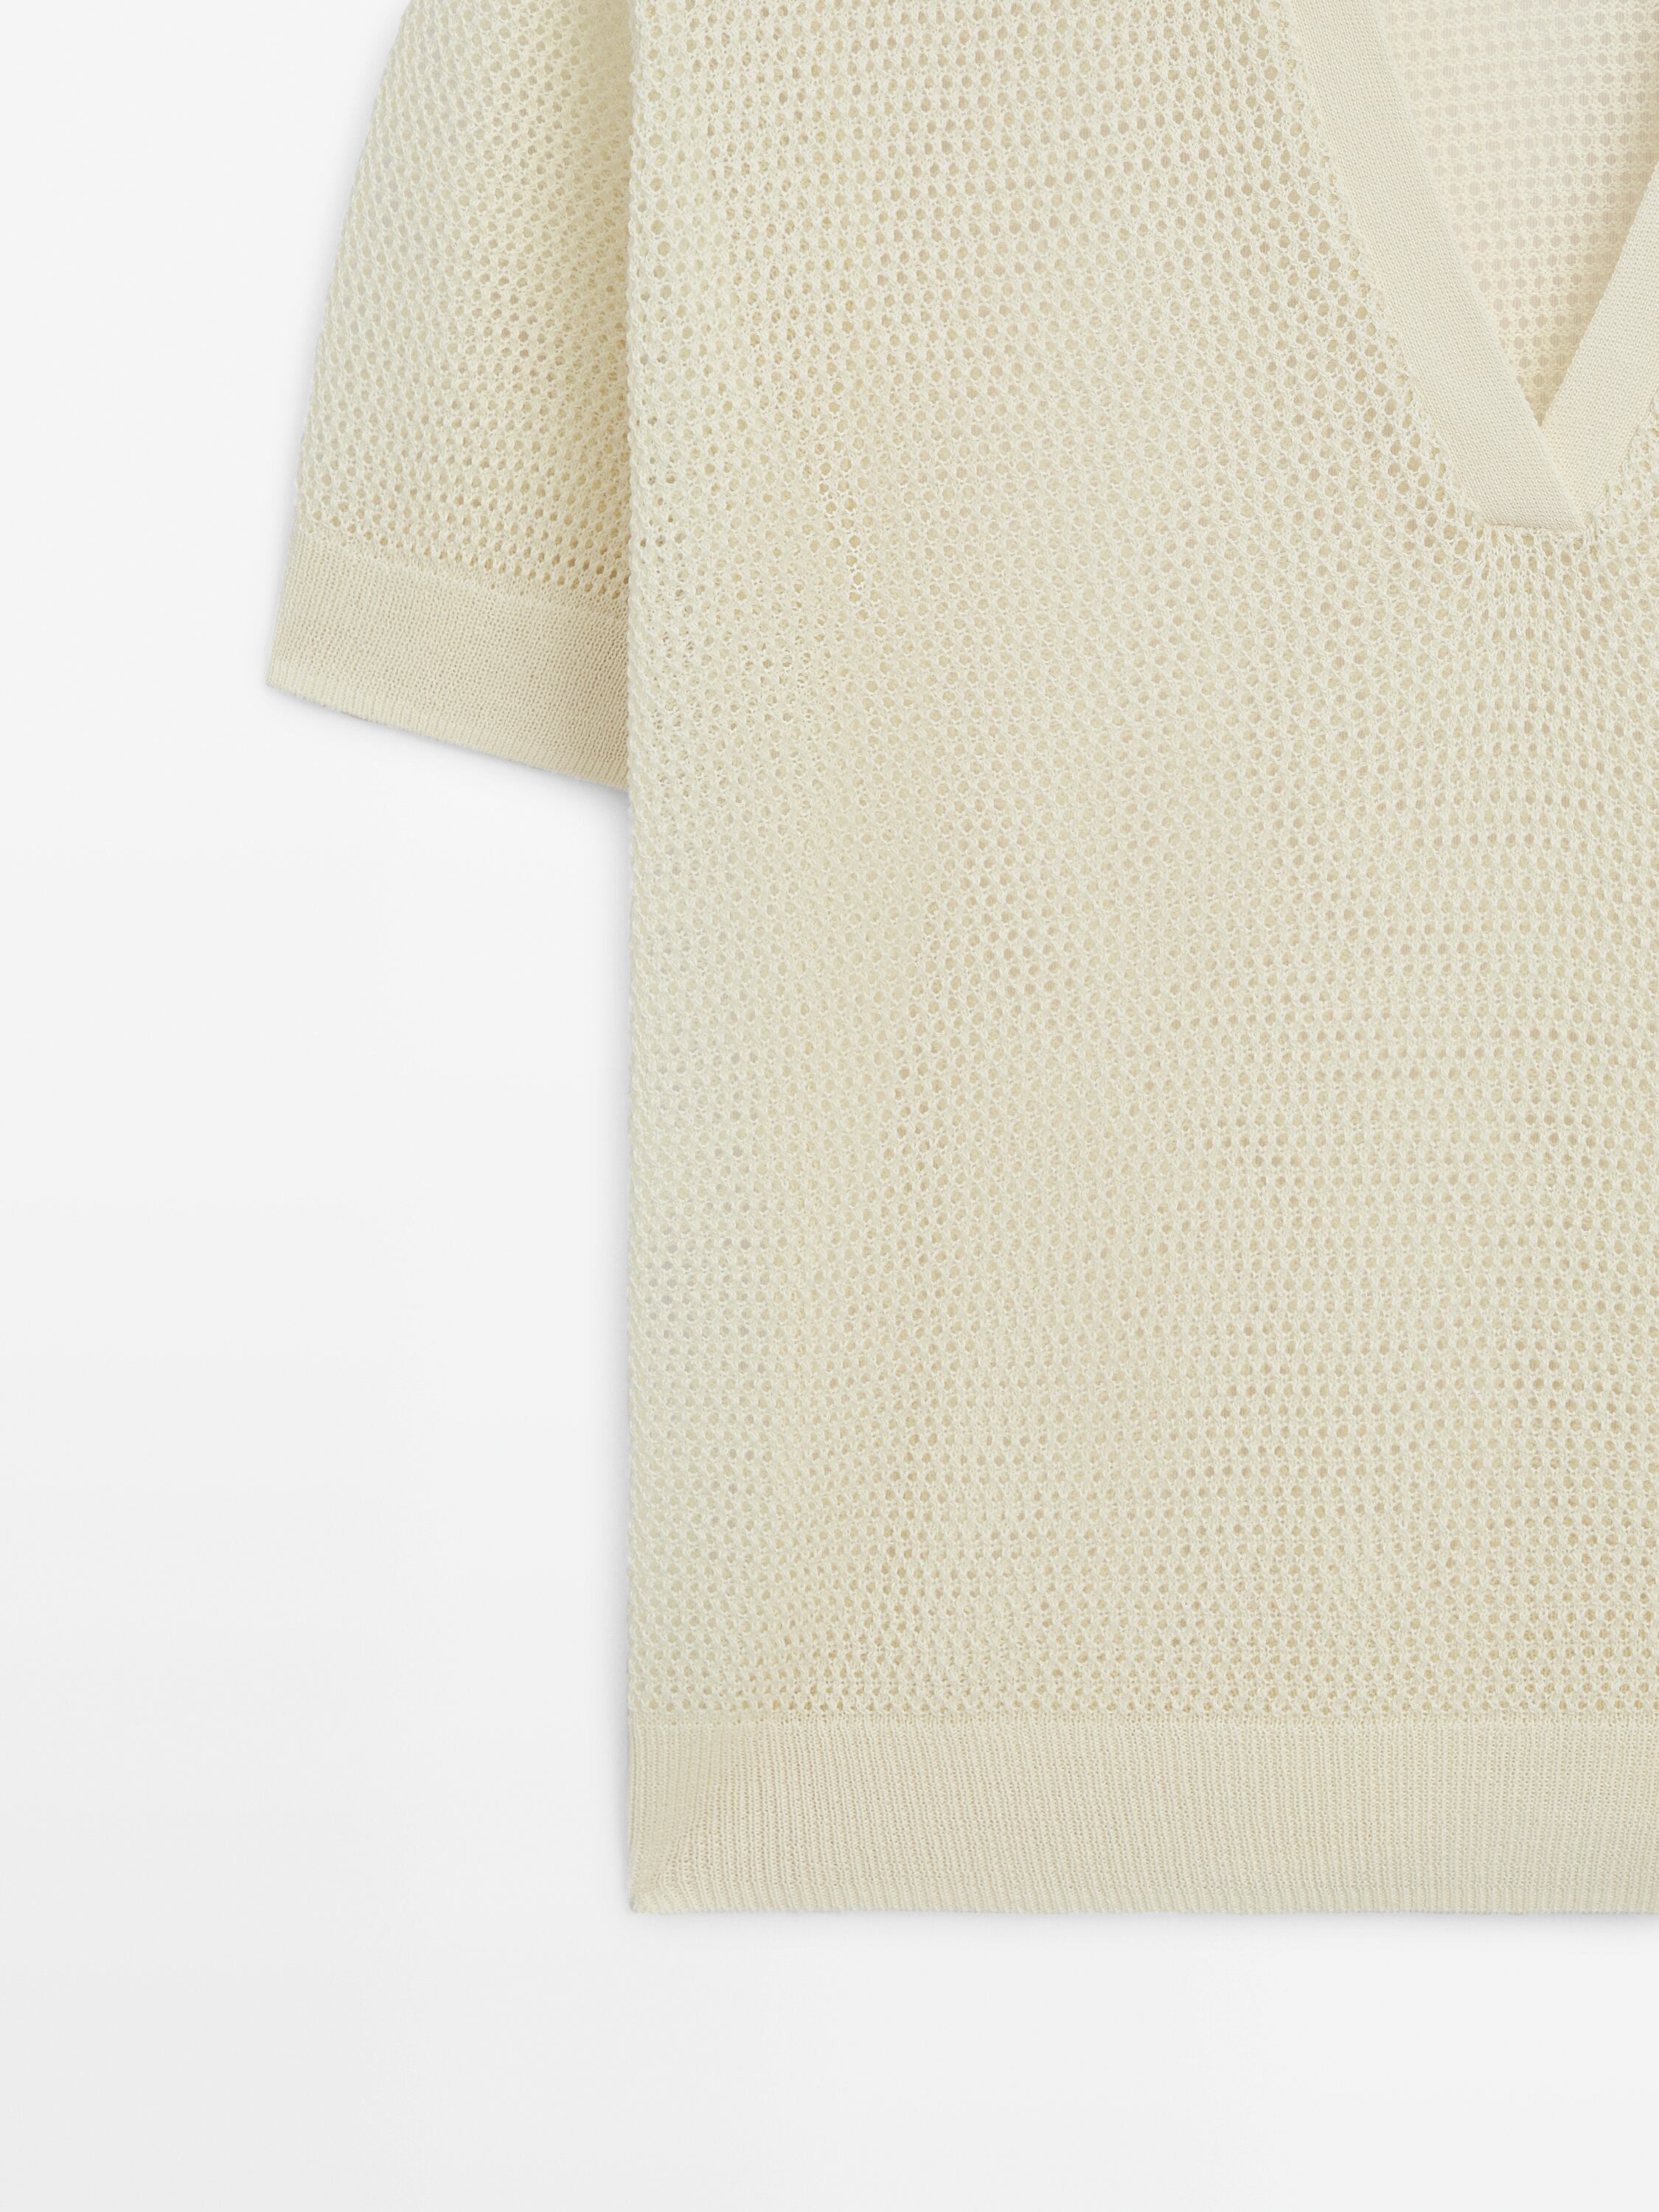 Mesh polo shirt with short sleeves